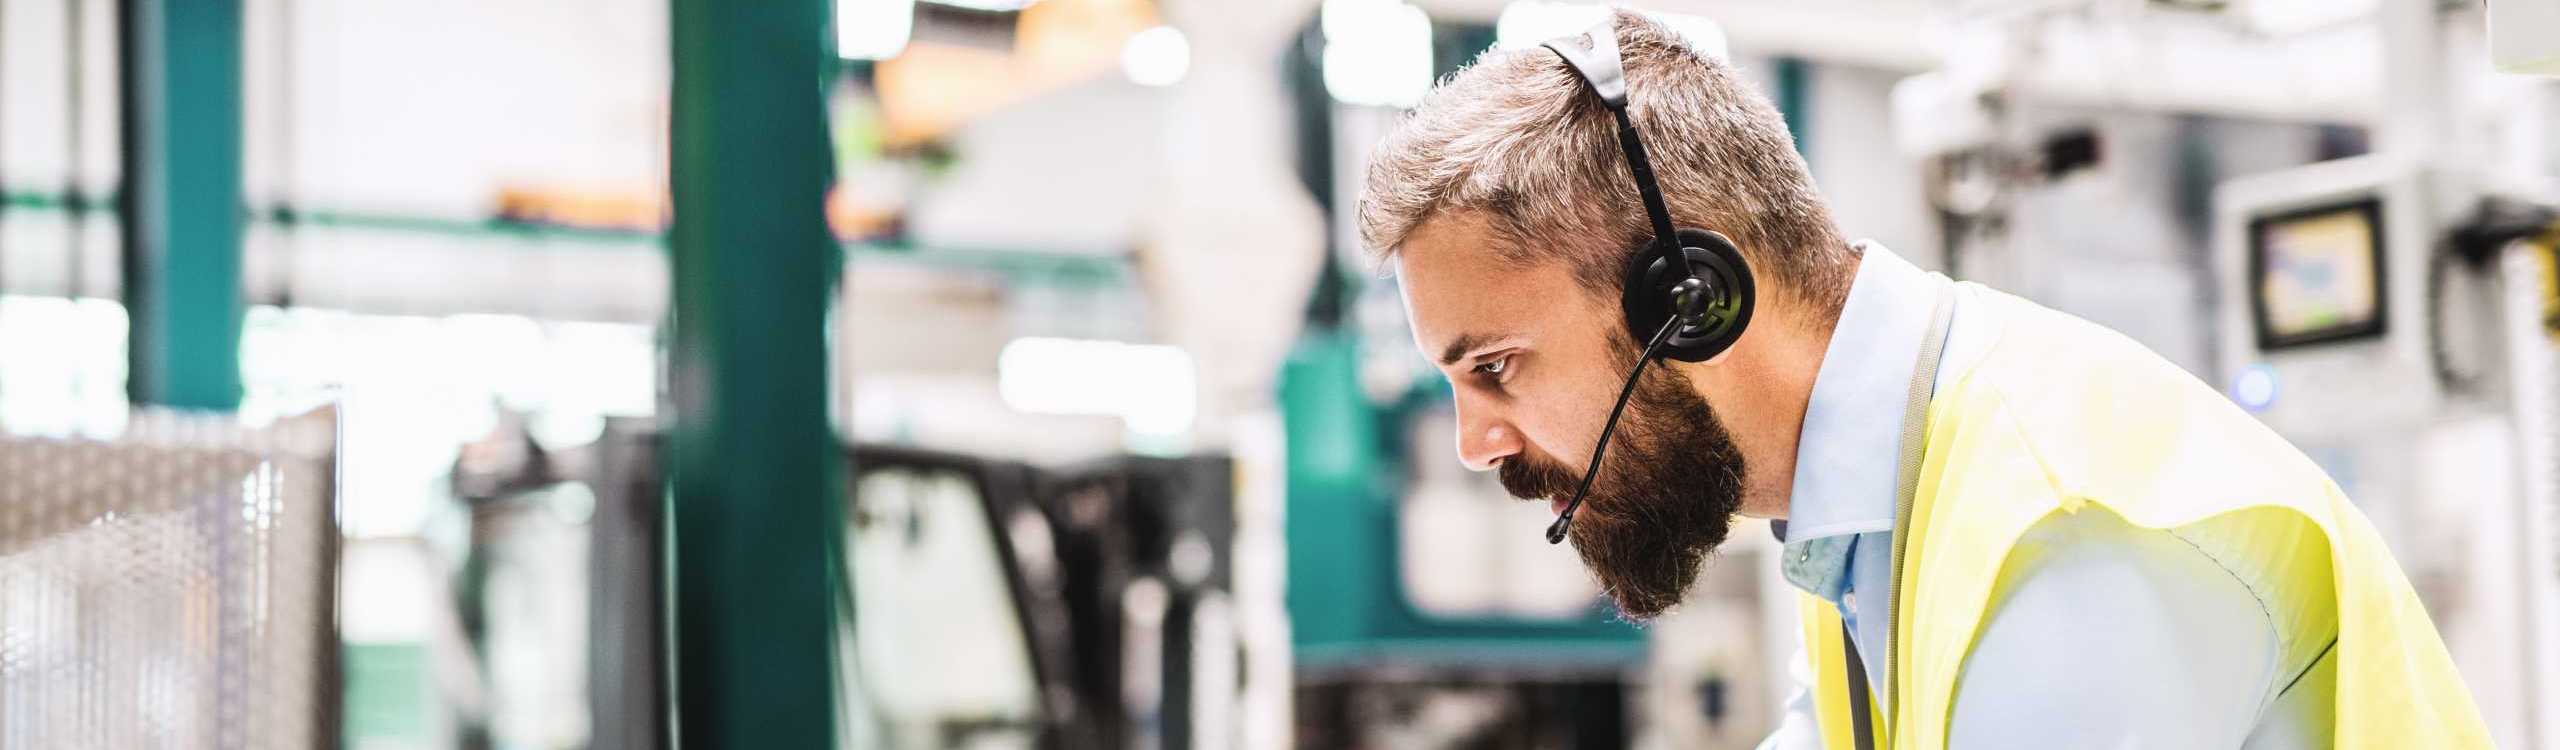 Engineer with a headset is working in a large industrial hall